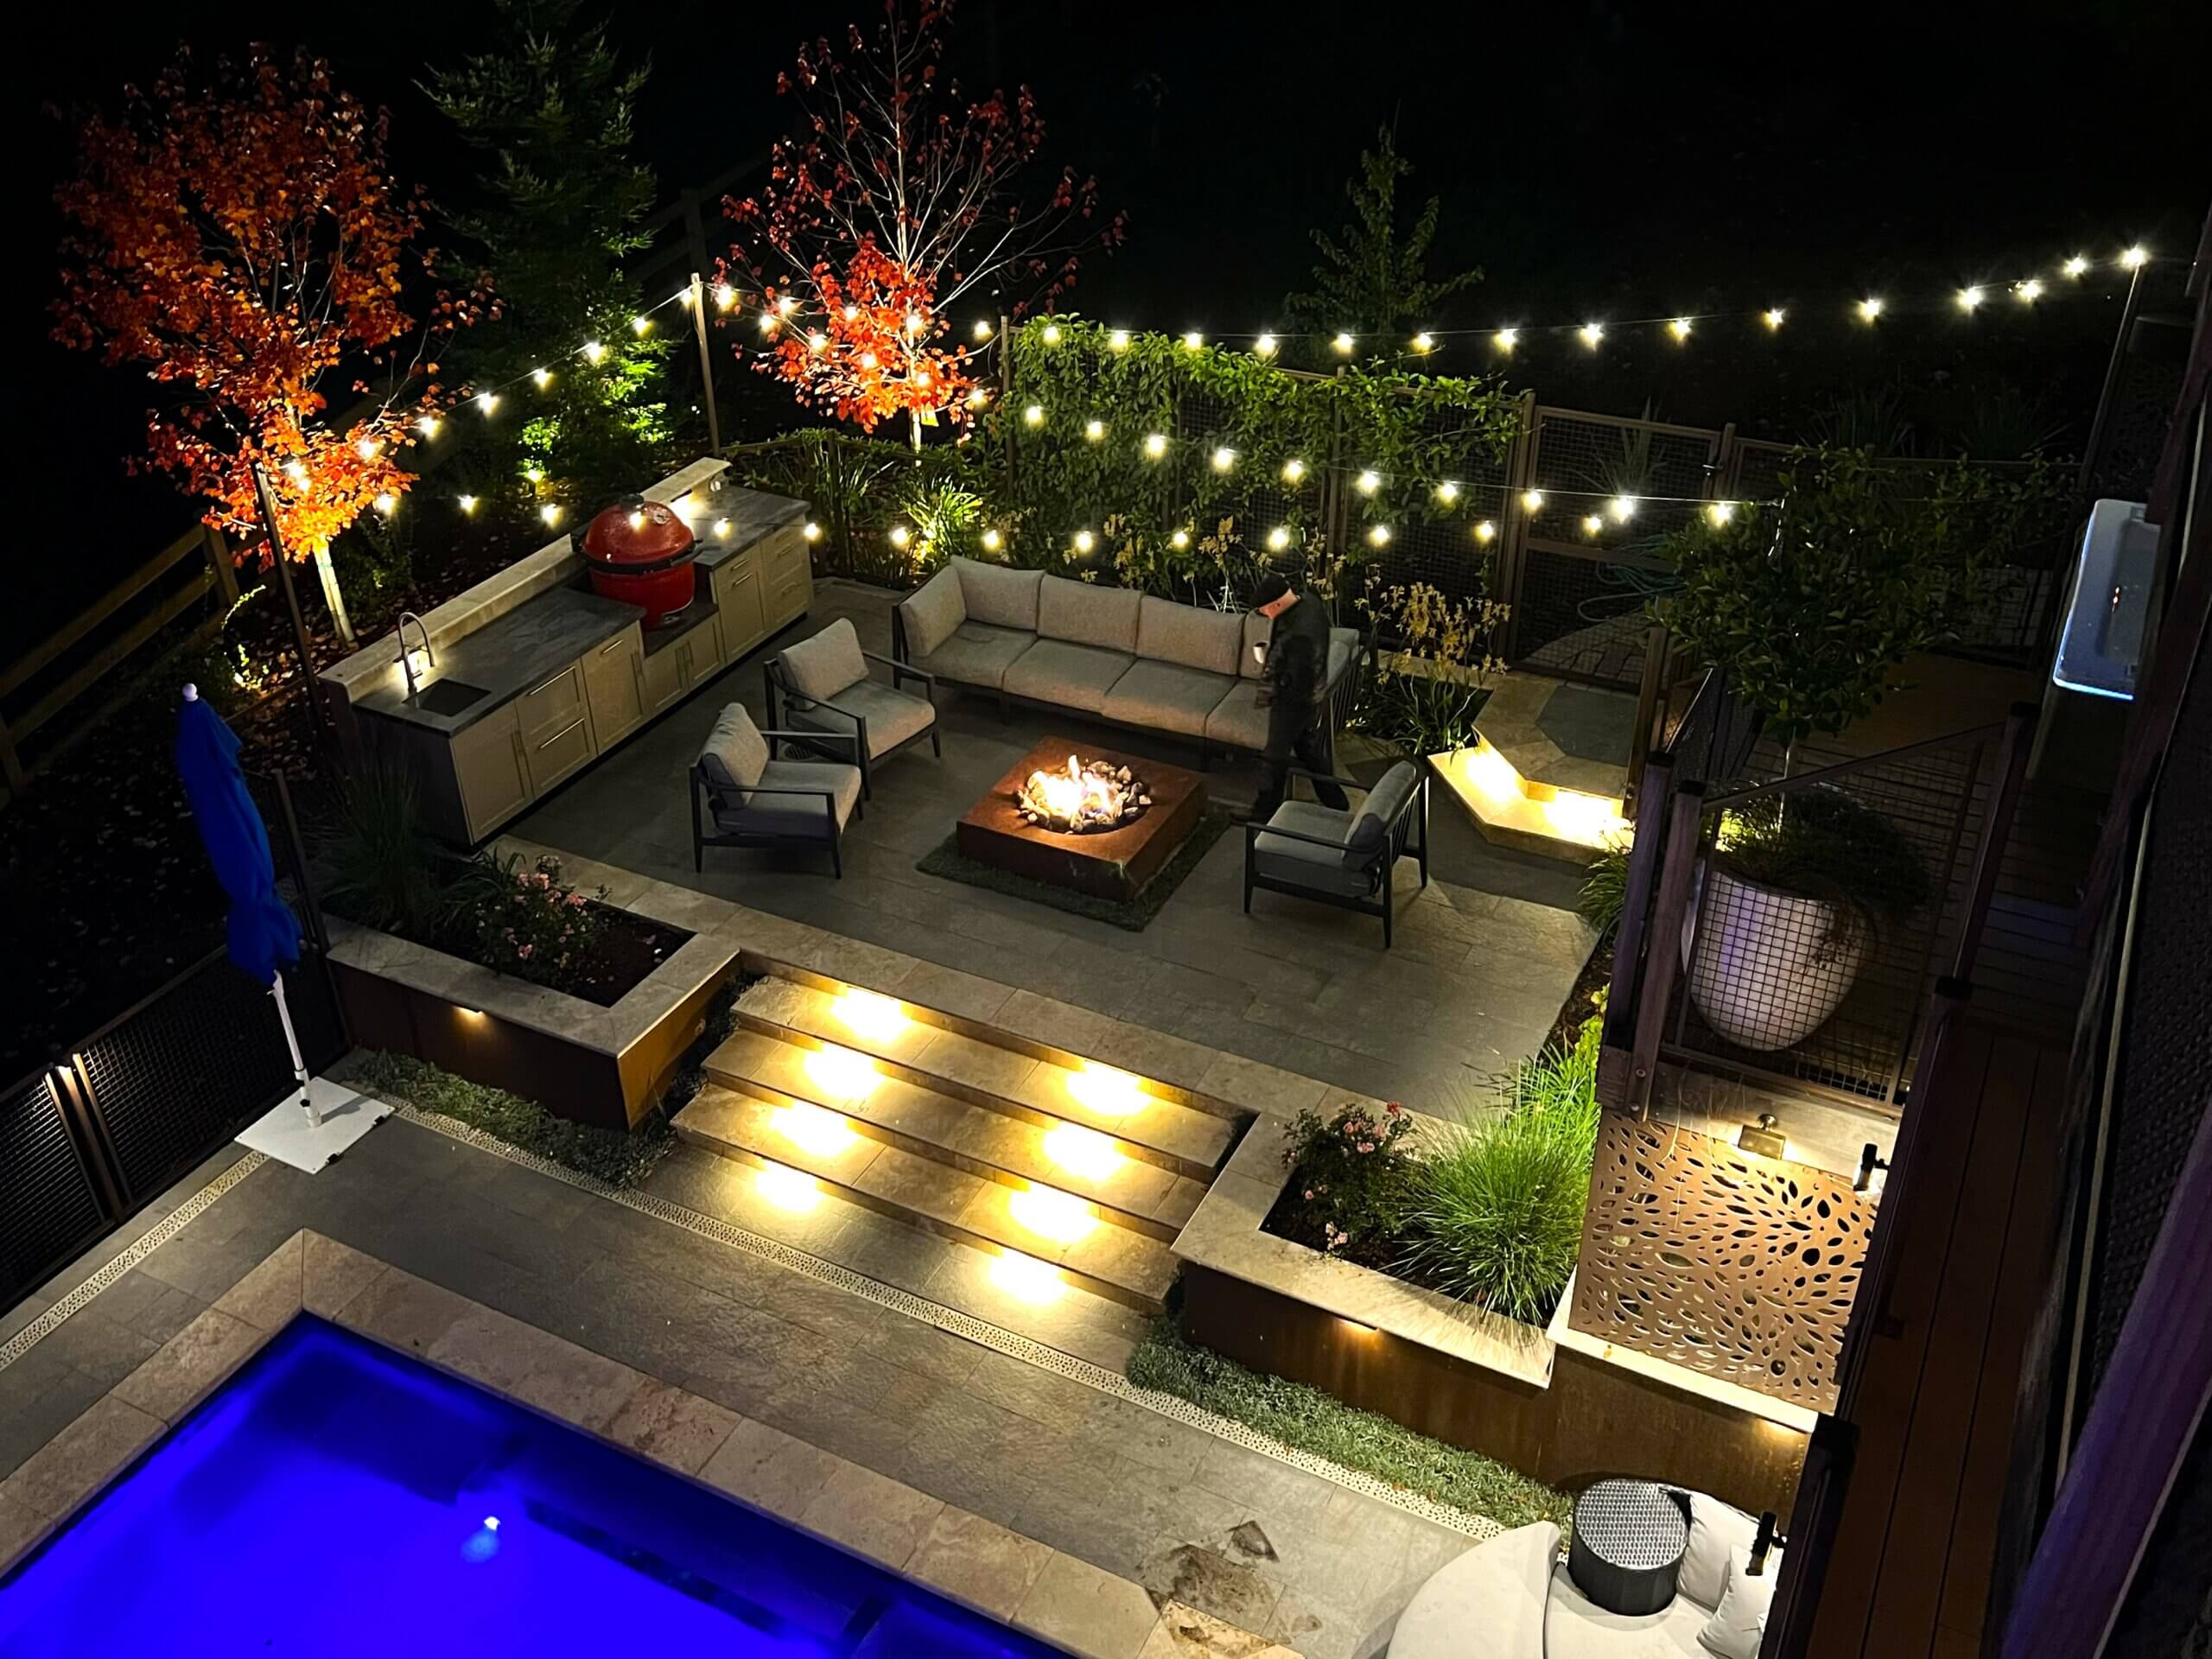 Outdoor kitchen and firepit area at night on steep sloped backyard with swimming pool